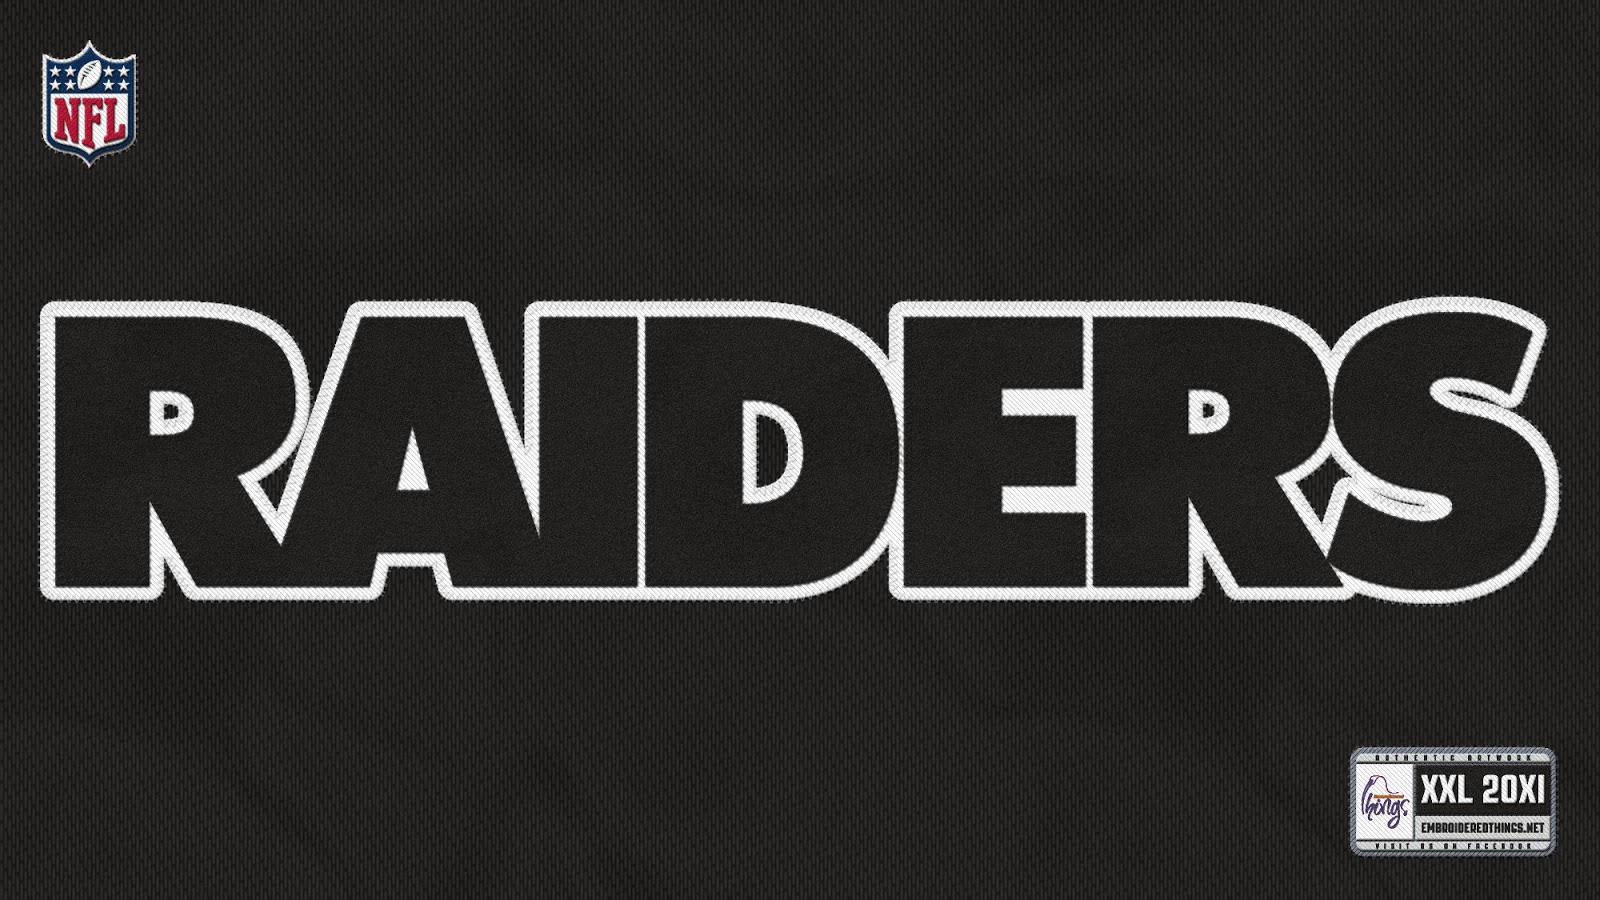 This New Oakland Raiders Wallpaper HD Image Is One Of